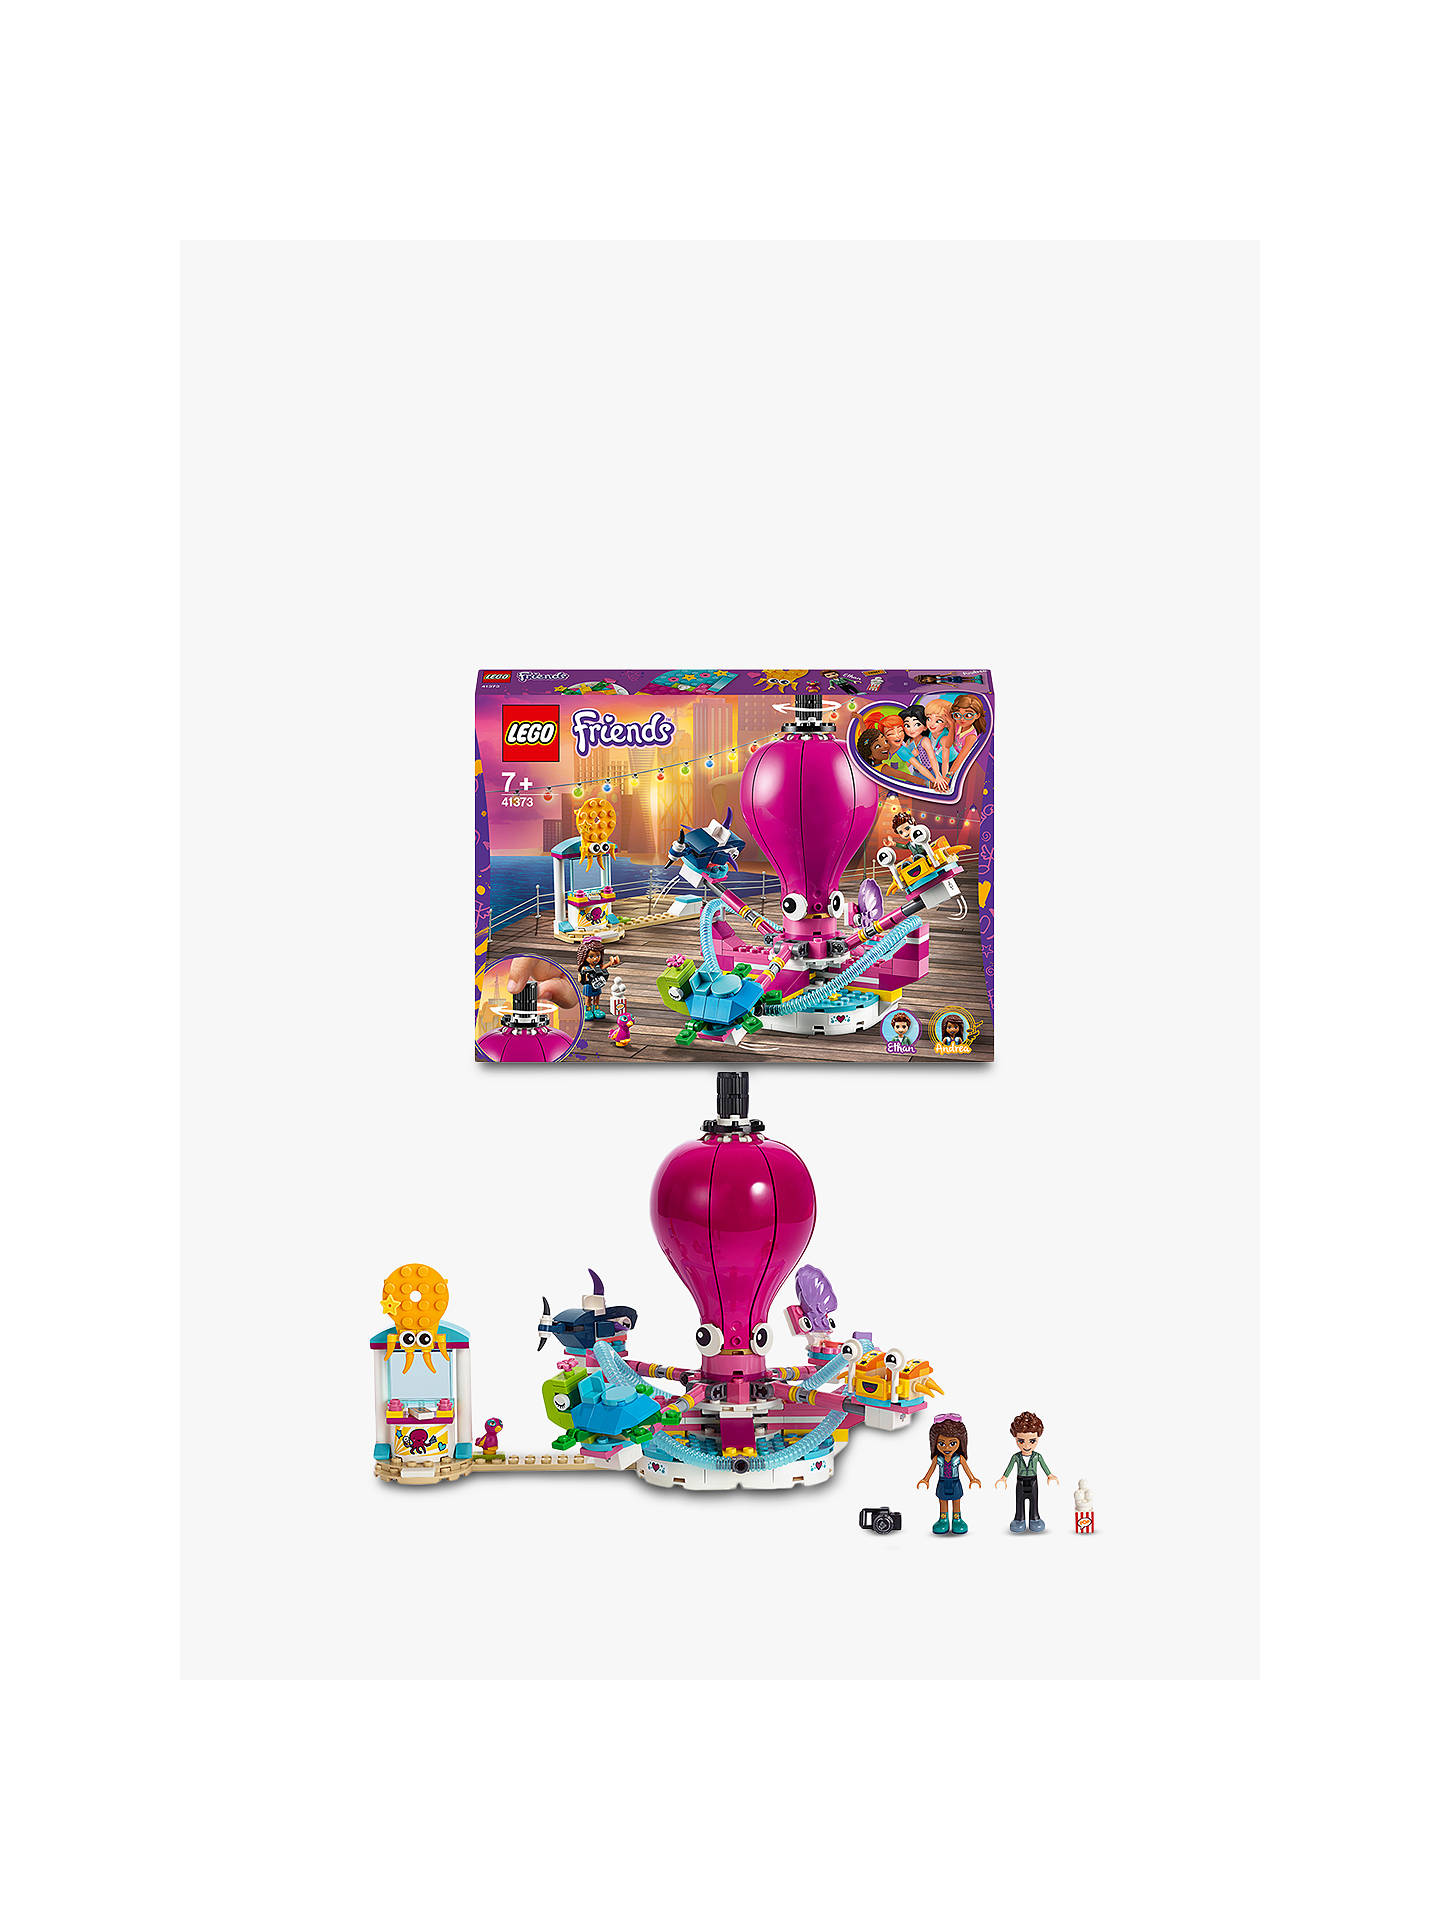 LEGO Friends 41373 Funny Octopus Ride at John Lewis & Partners